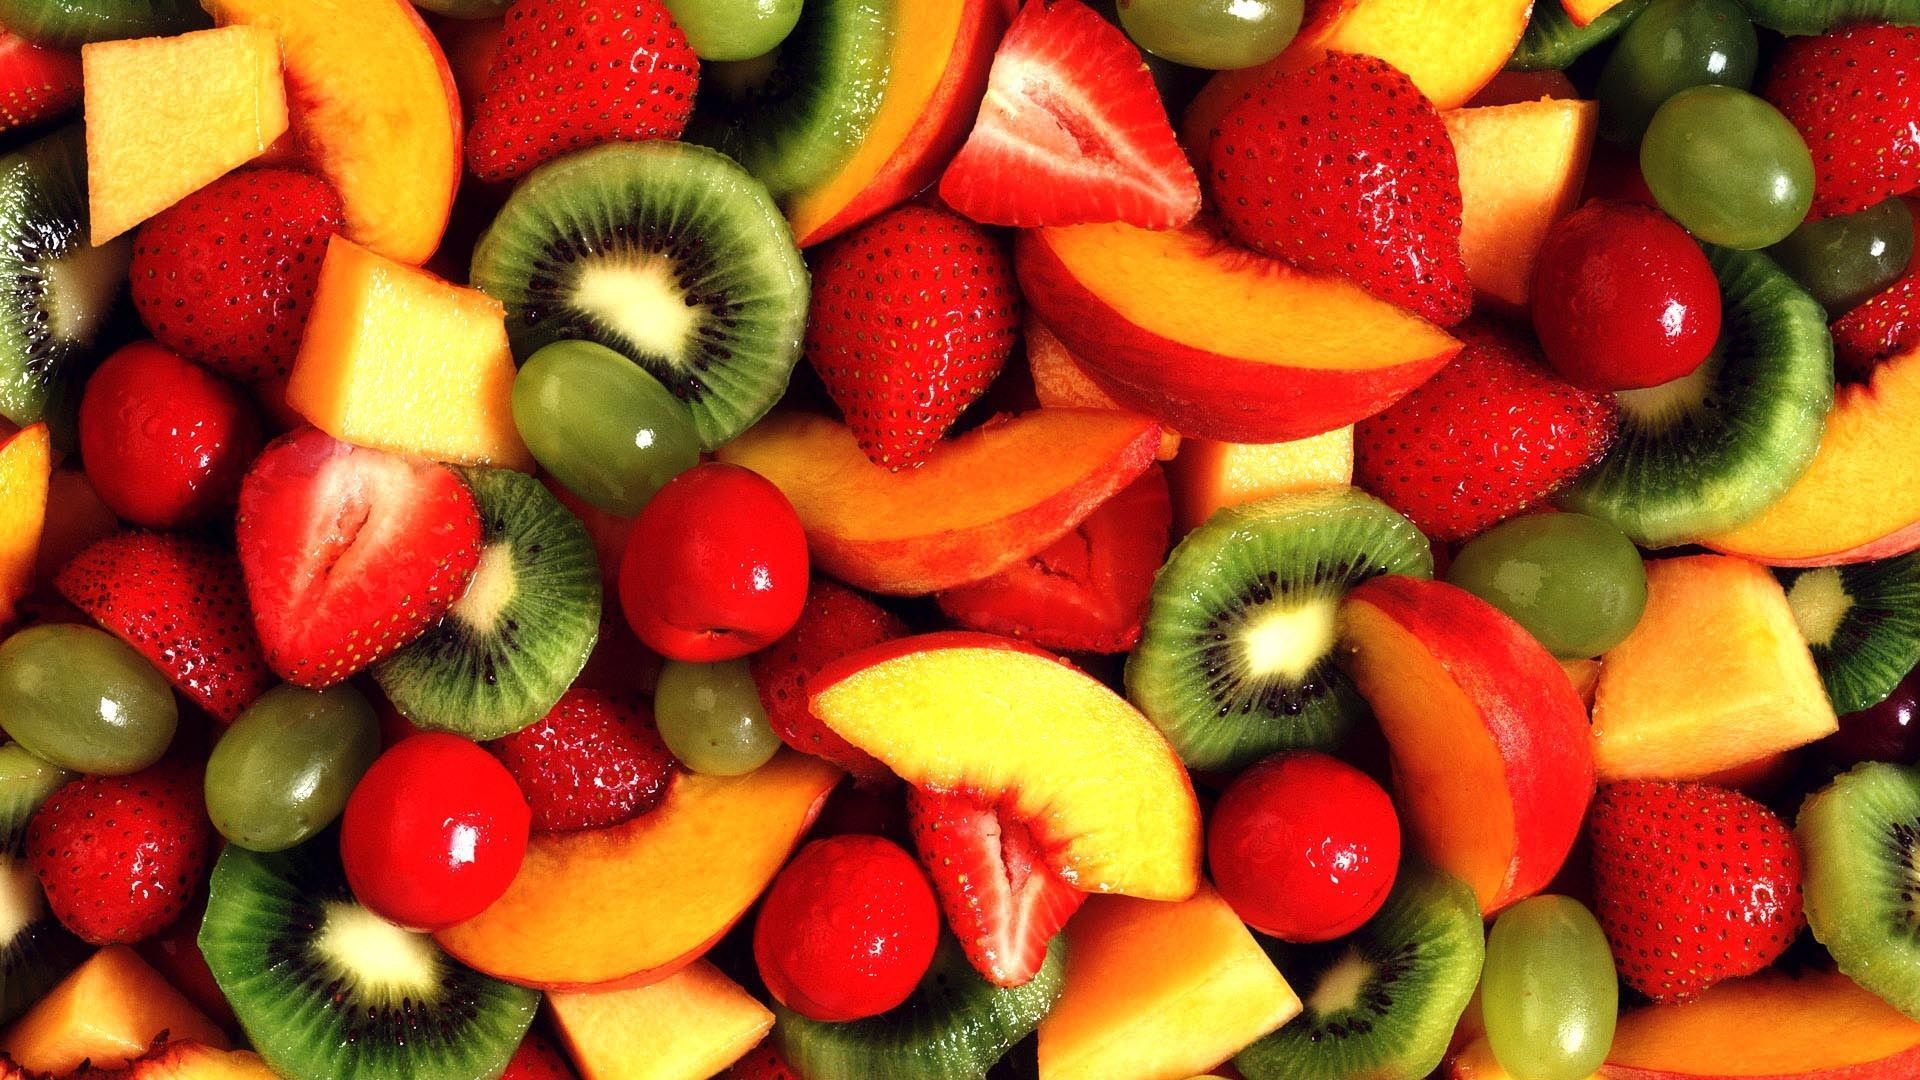 Gallery for - hd wallpapers of fruits and vegetables